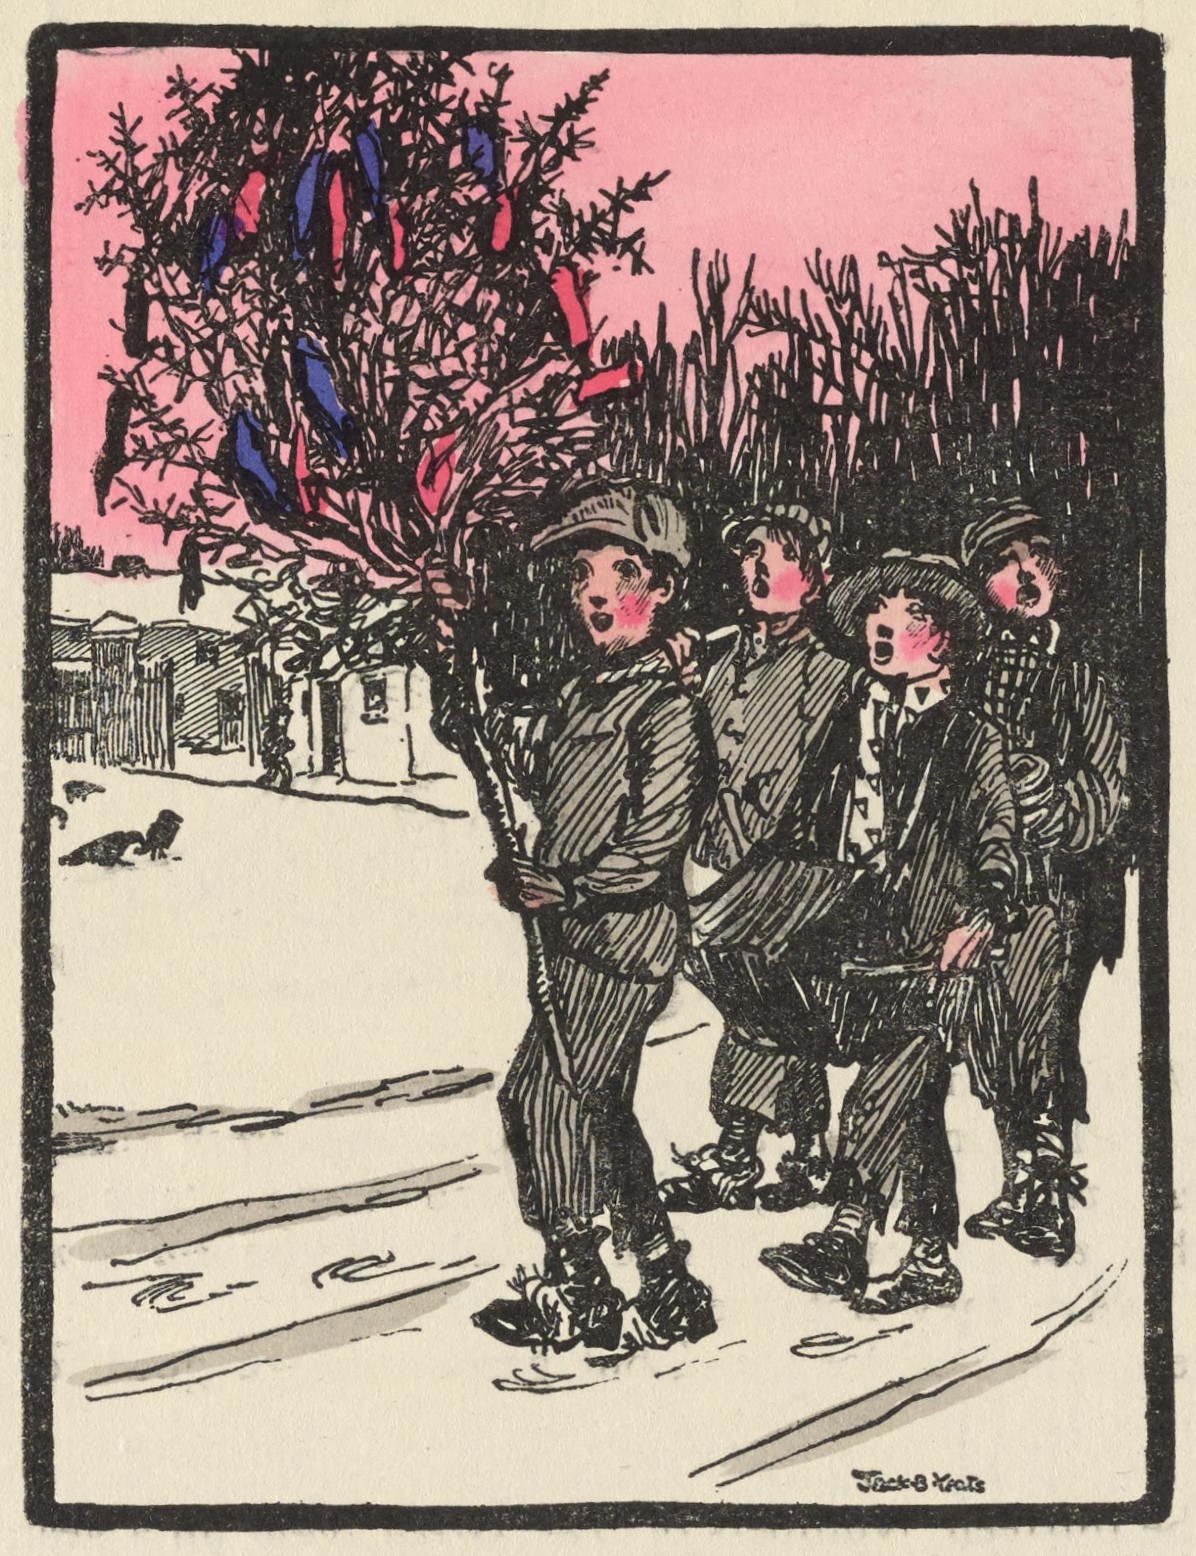 This hand-coloured illustration is centered above the poem’s text, occupying two-third of the page. It’s outlined in a thick black rectangular border, in portrait orientation. Four pale-skinned boys with rosy cheeks walk in the snow, singing. The foremost boy holds a tree branch decorated with red and blue cloths or ribbons; another plays the accordion or concertina. In the background are several white houses, black trees, and black birds. The sky is coloured pink. The artist’s signature is in the bottom right of the frame.